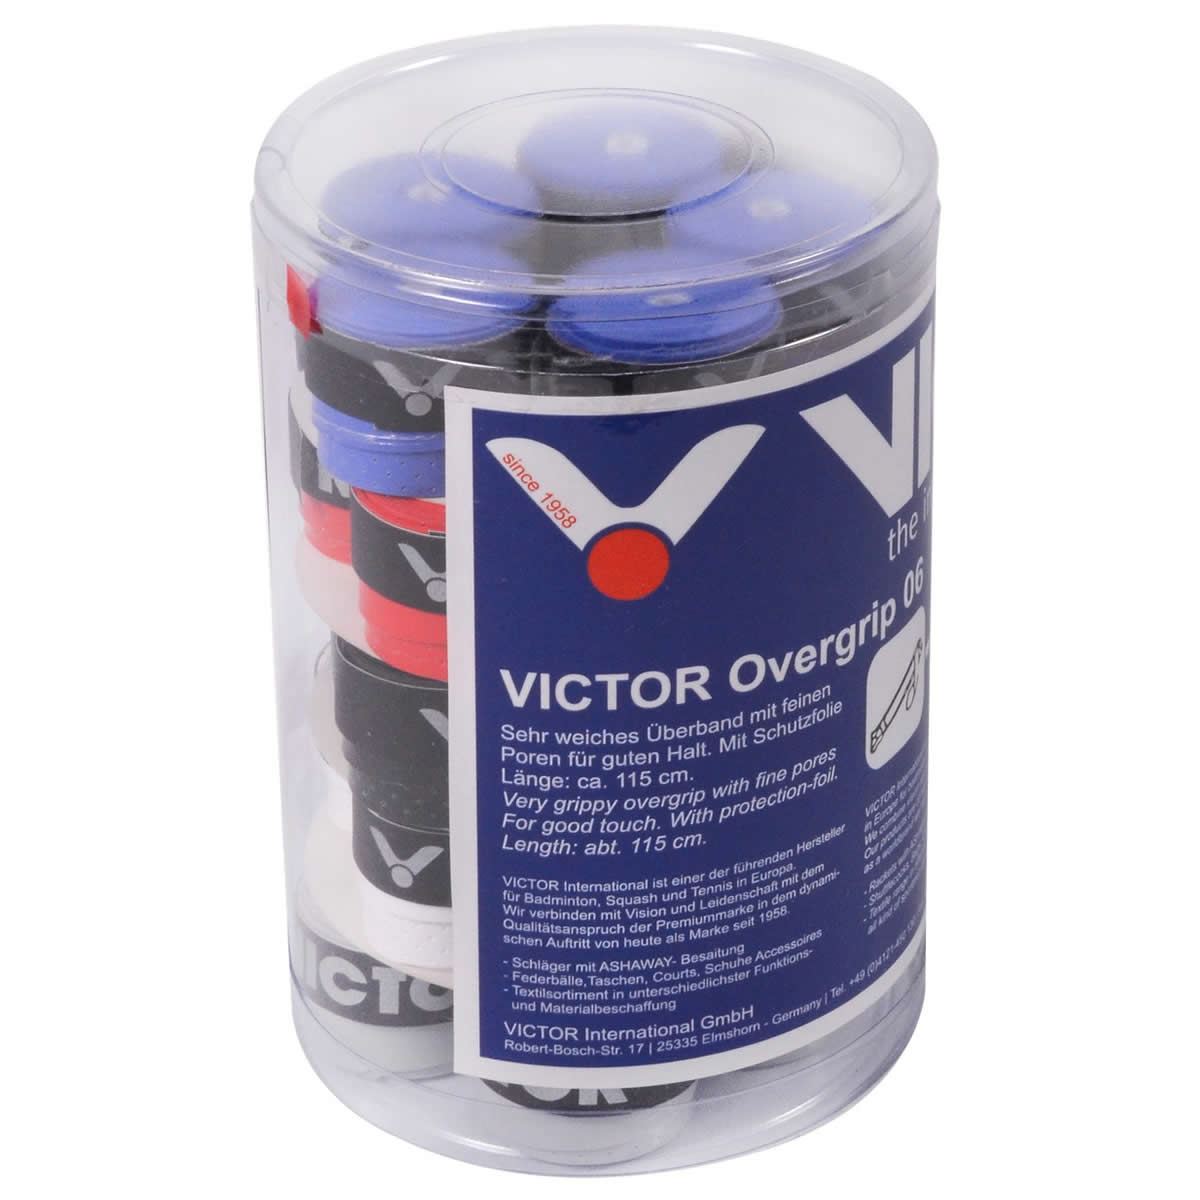 Victor Badminton Racket Overgrip 06 - Box of 25 Assorted Colors